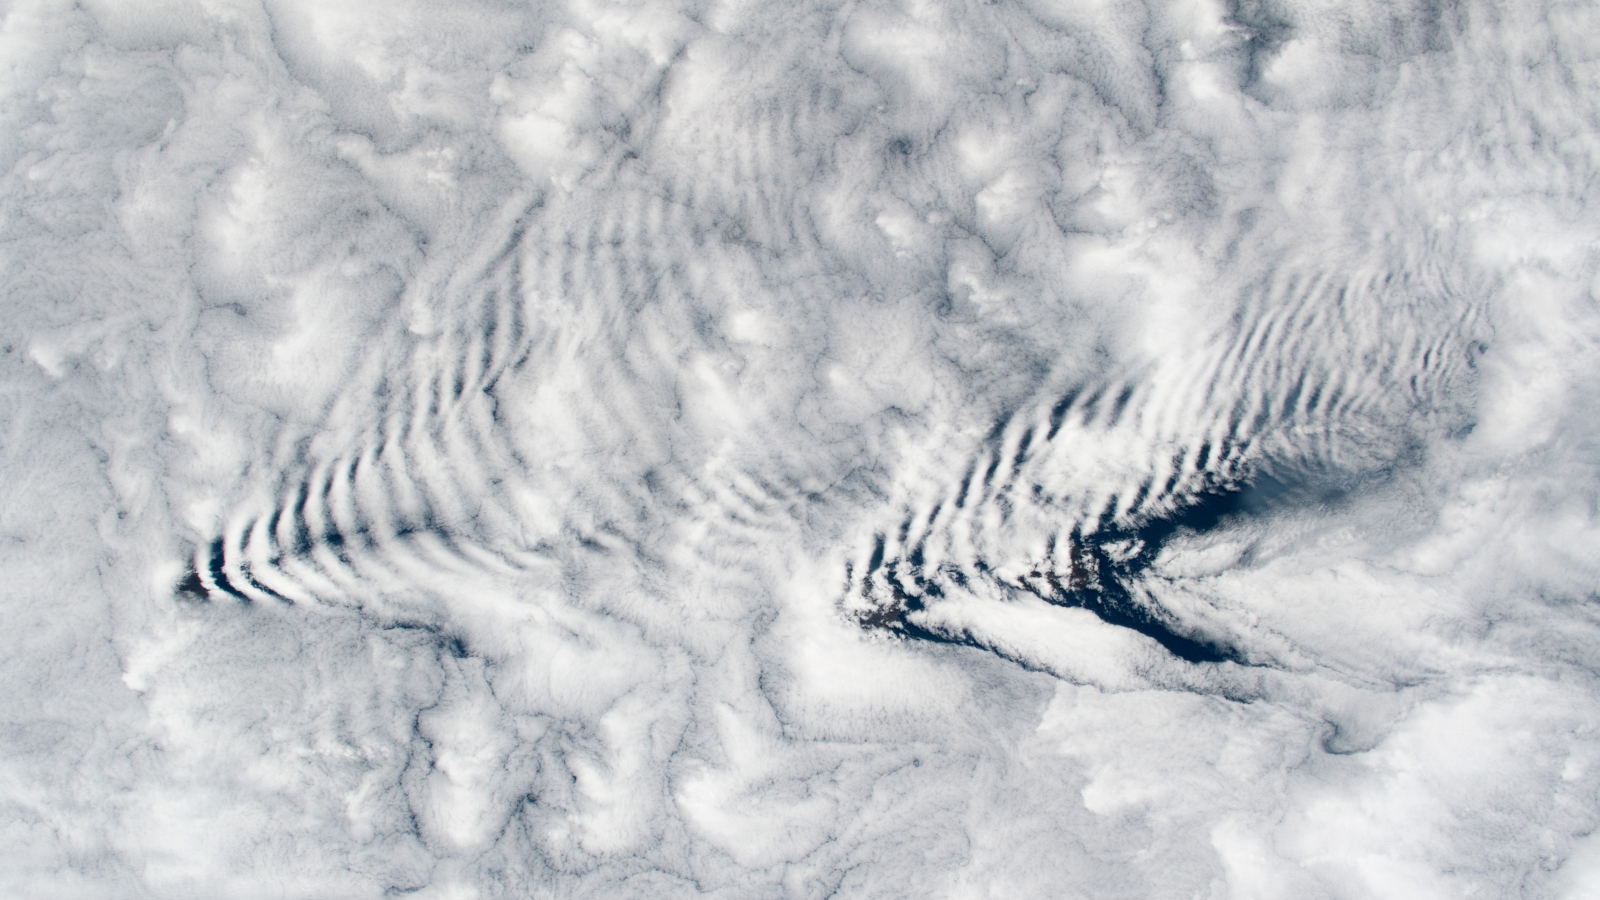  Earth from space: Gravity waves spark pair of perfect cloud ripples above uninhabited islands 